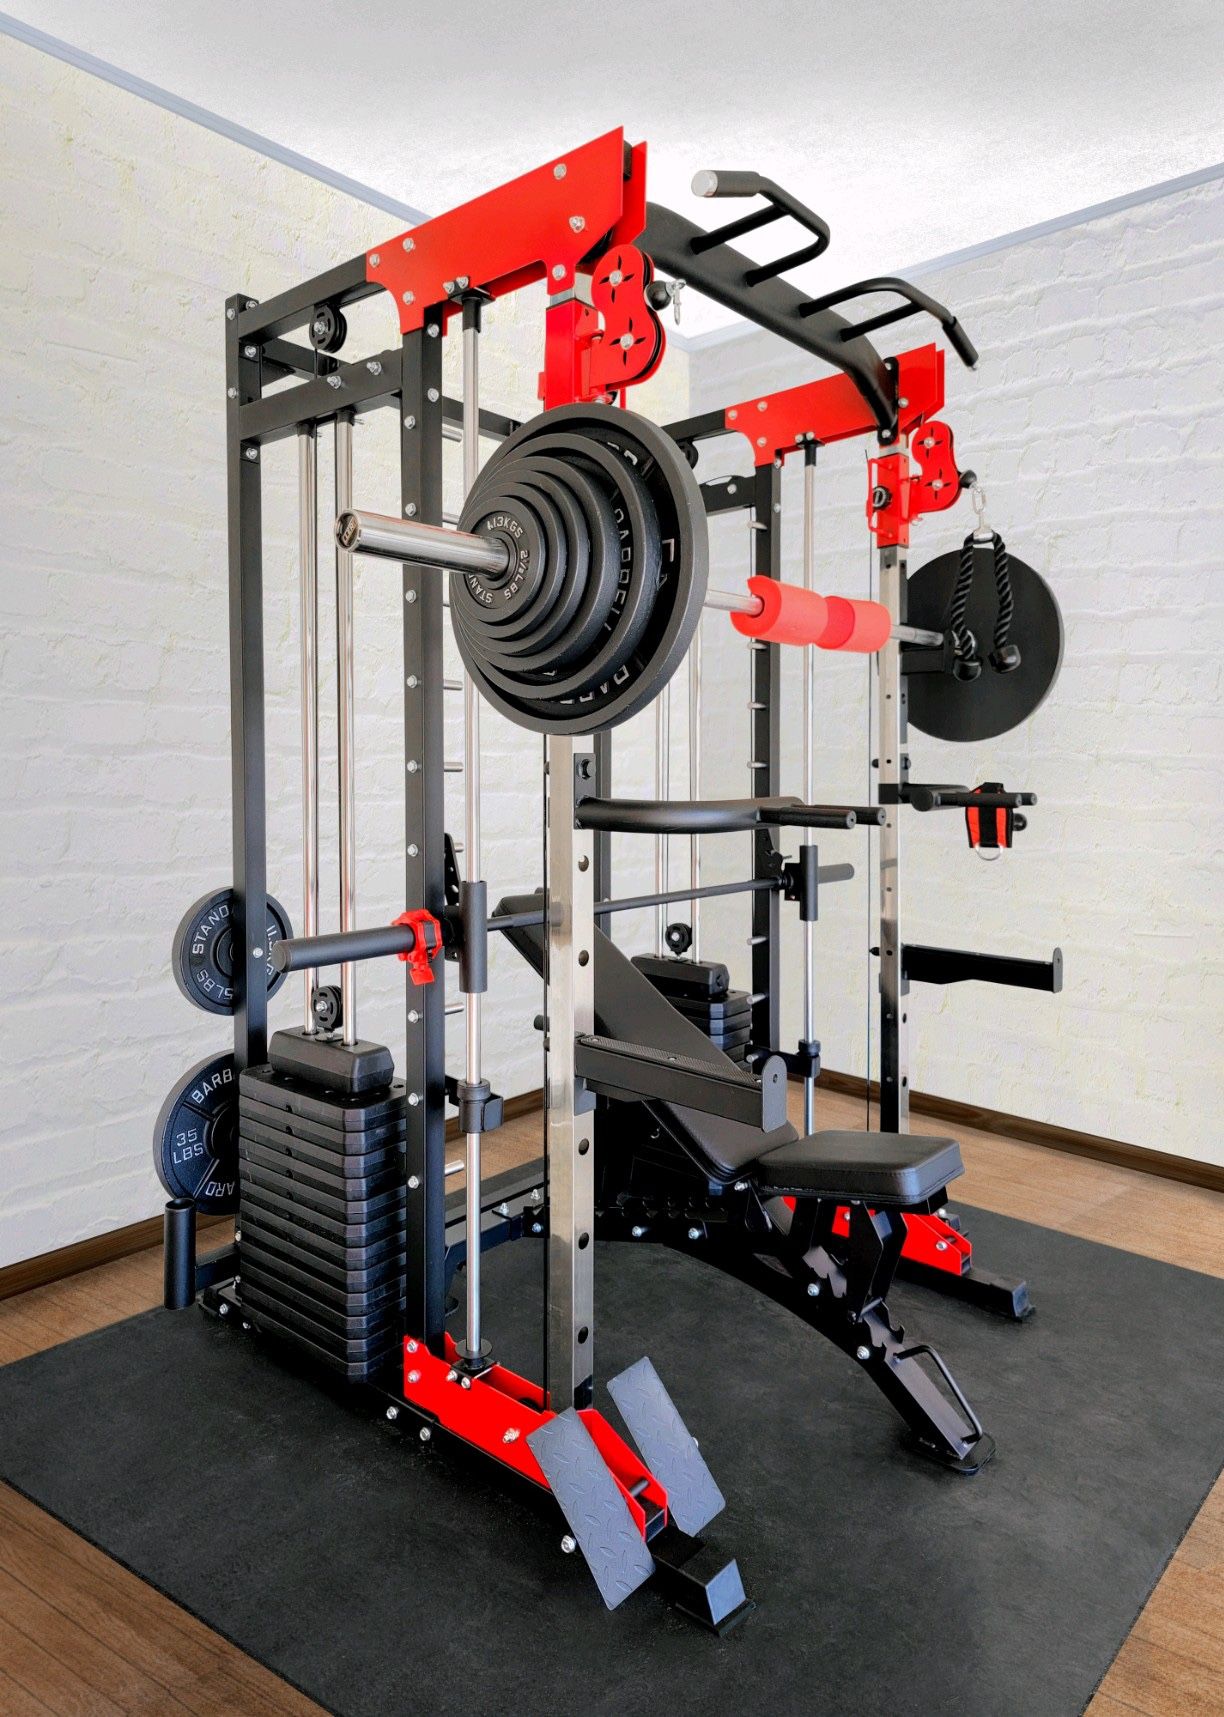 Free Delivery - Brand New - Weight Machine- Smith Machine- Functional Trainer - 300lbs Weight Stacks included  - Bench & Weights INCLUDED 